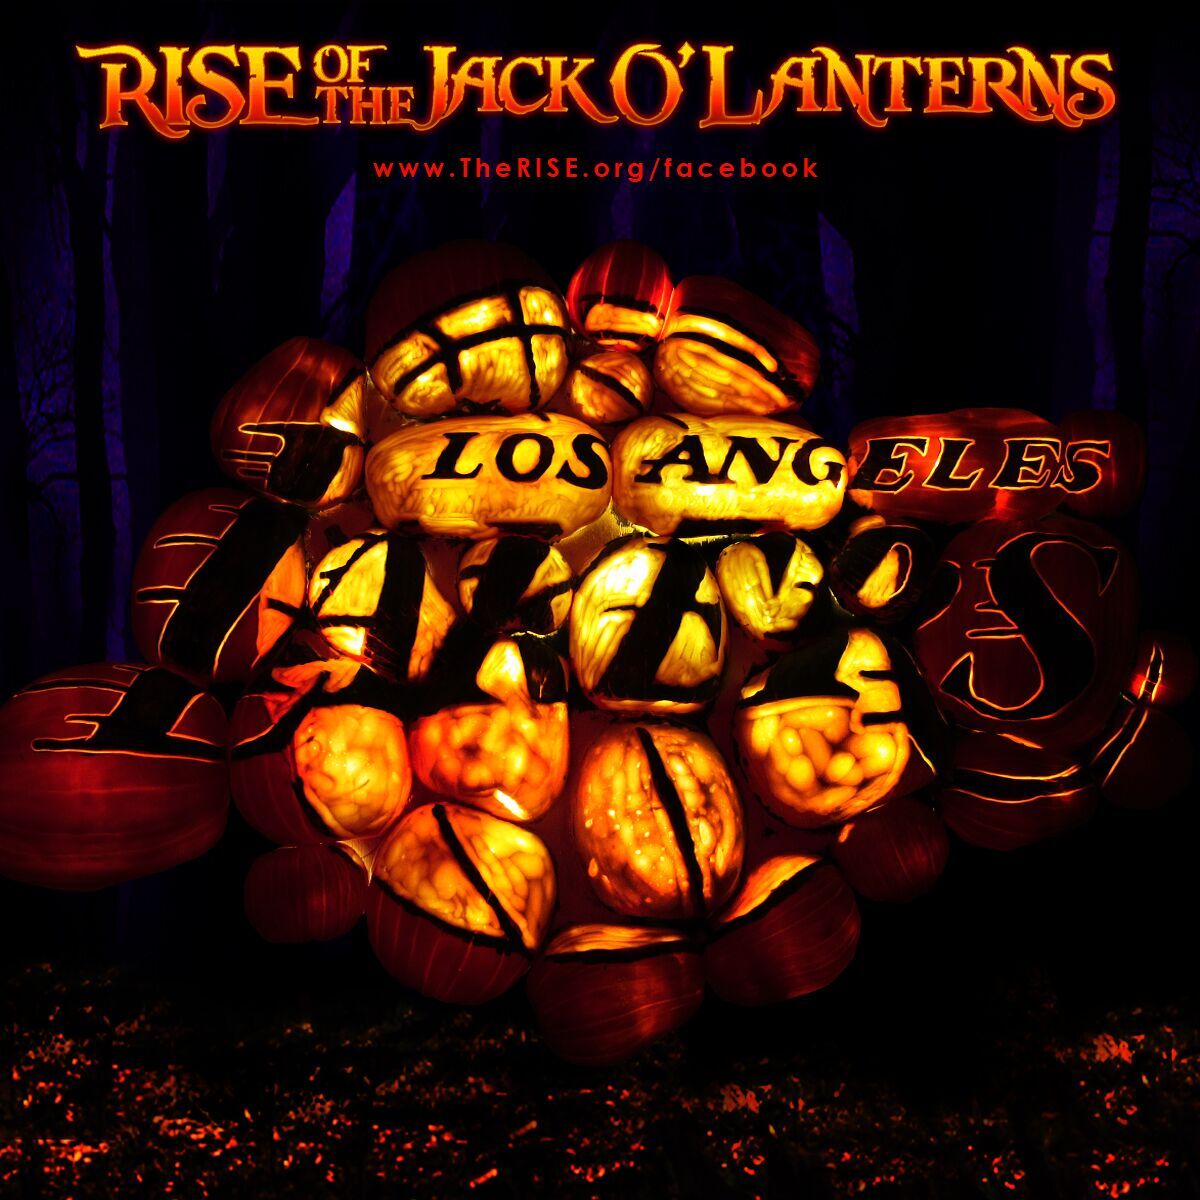 Rise of the jack o lanterns, halloween events, halloween events los angeles